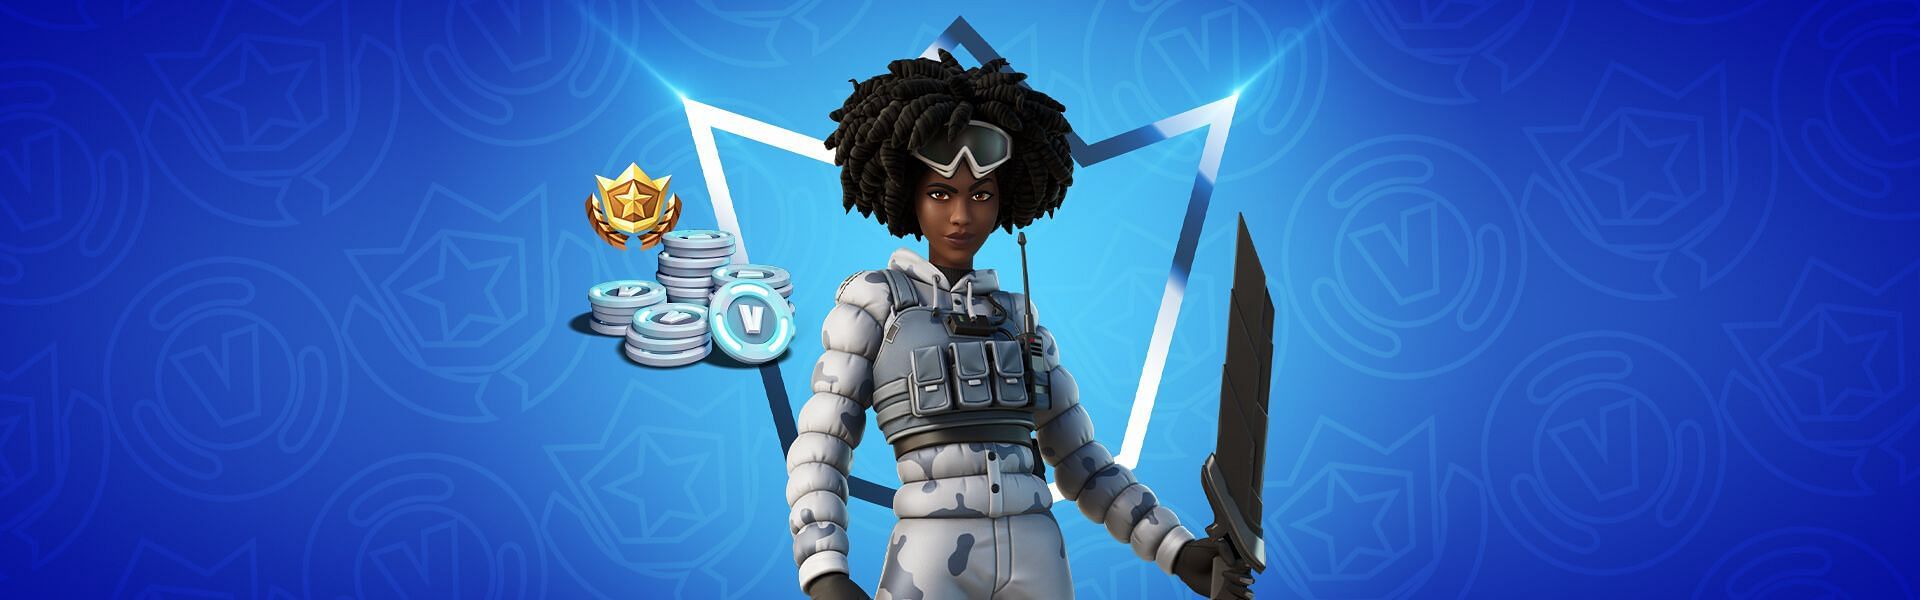 Dr. Slone&#039;s Crew skin wasn&#039;t as popular as Epic thought it would be. (Image via Epic Games)